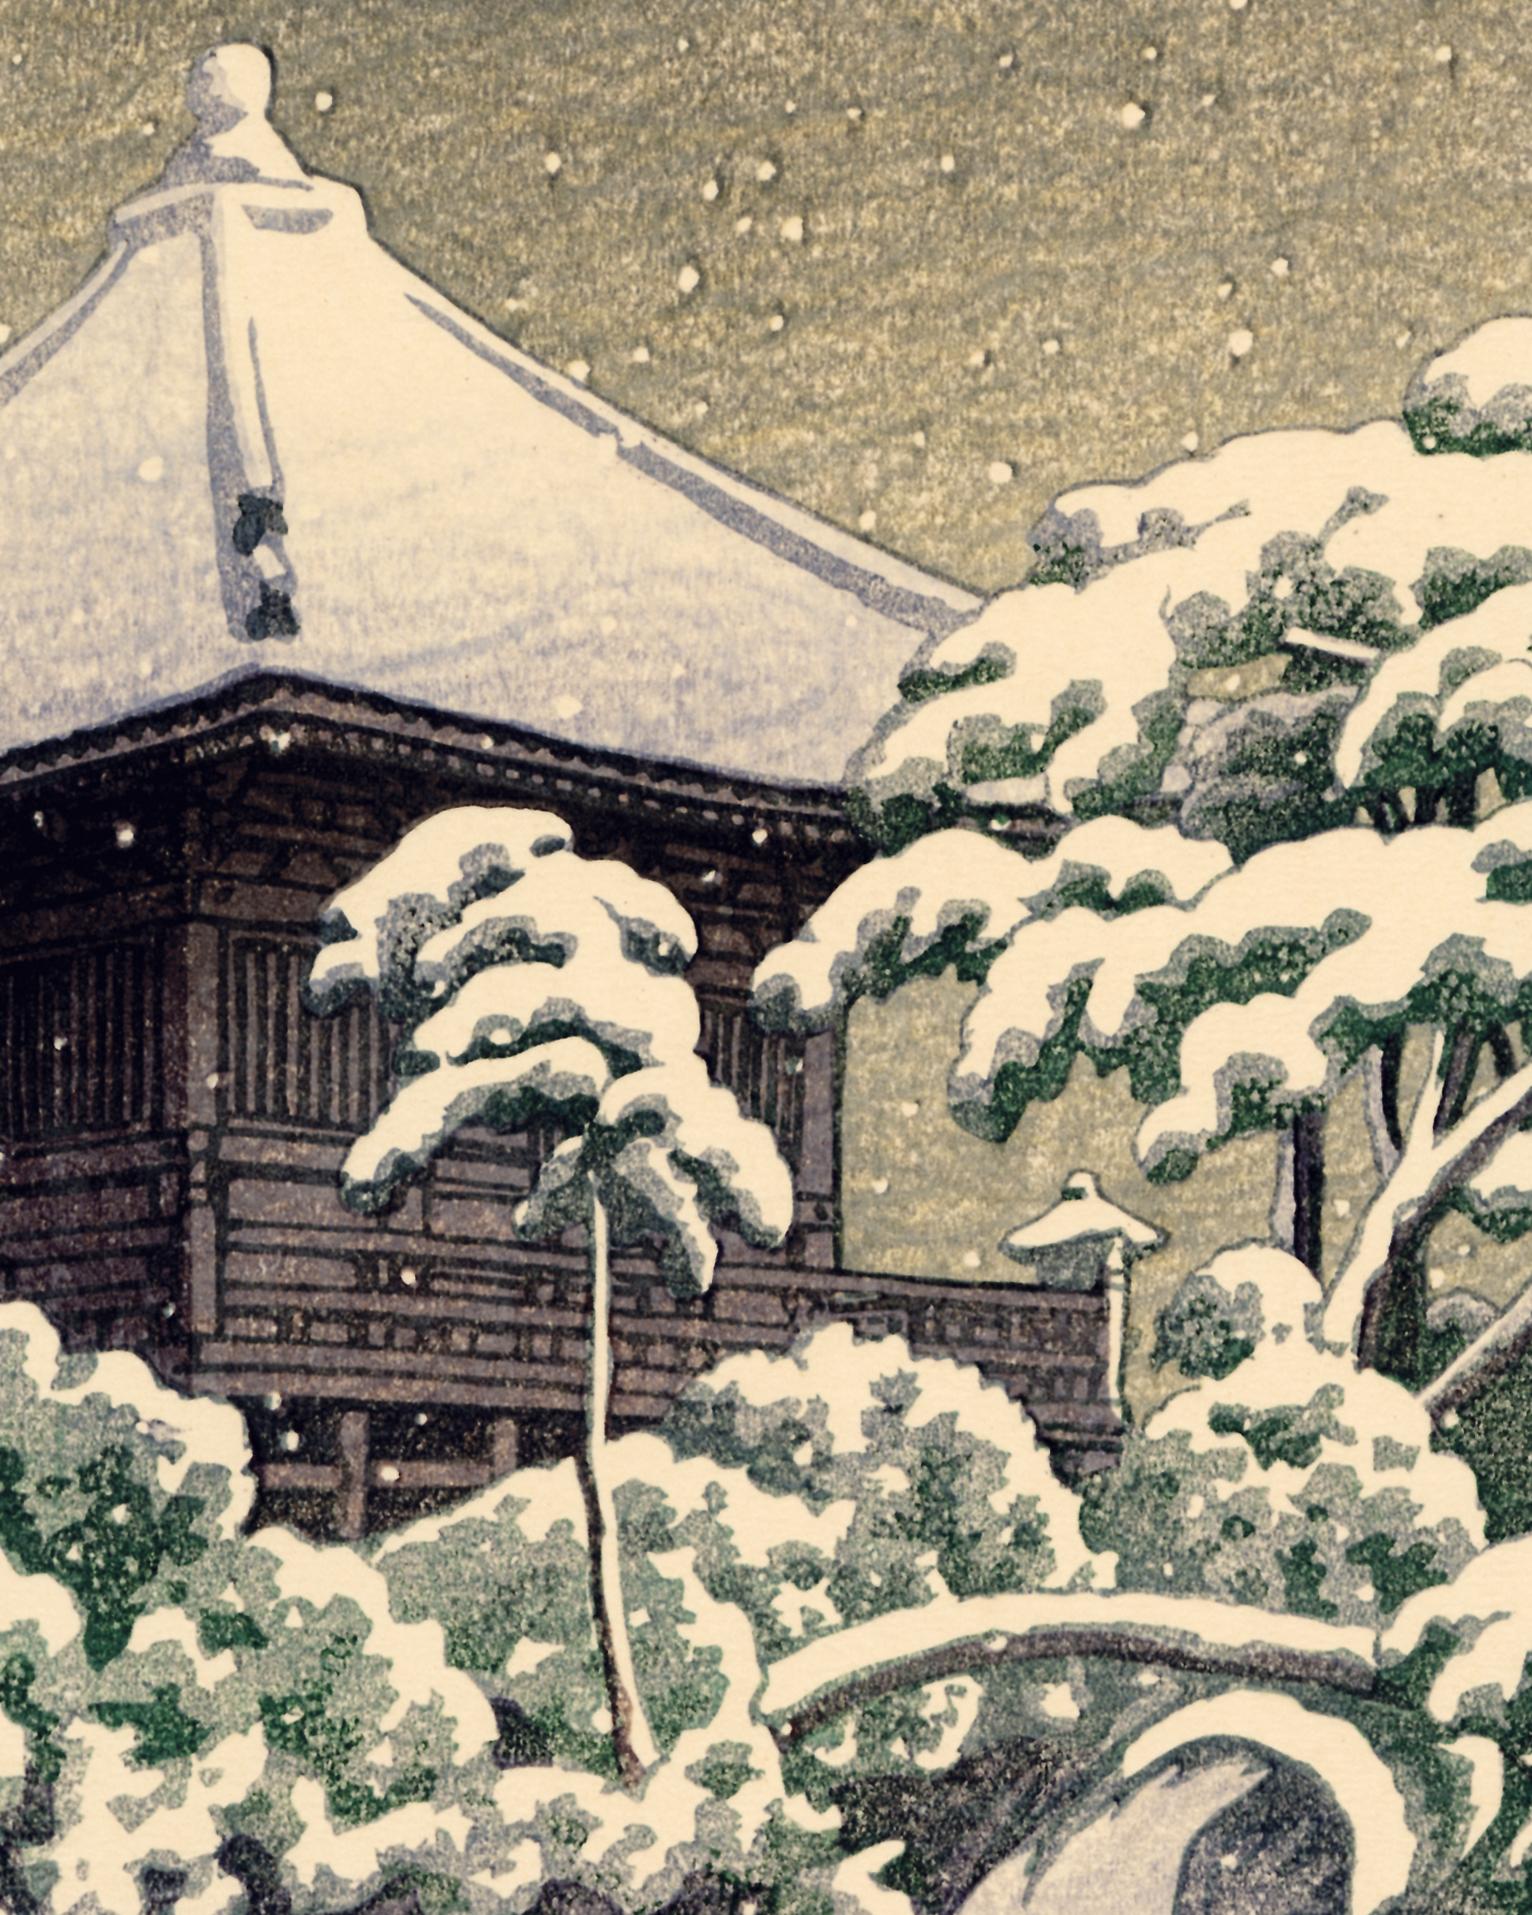 Snow at Godaido Temple in Matsushima, 1st Edition - Beige Landscape Print by Kawase Hasui